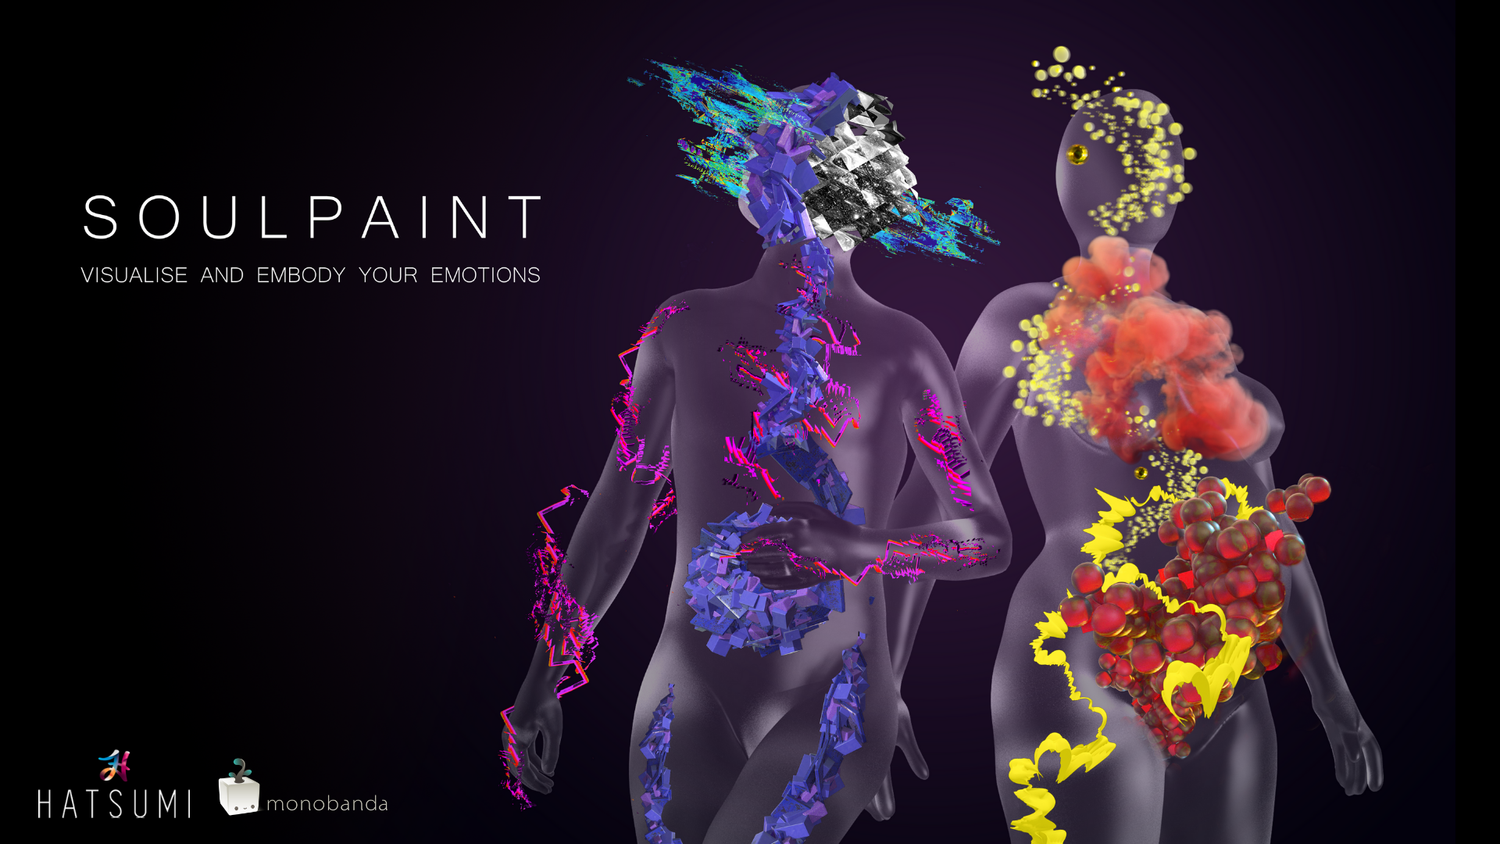 Promotional image for VR experience SoulPaint